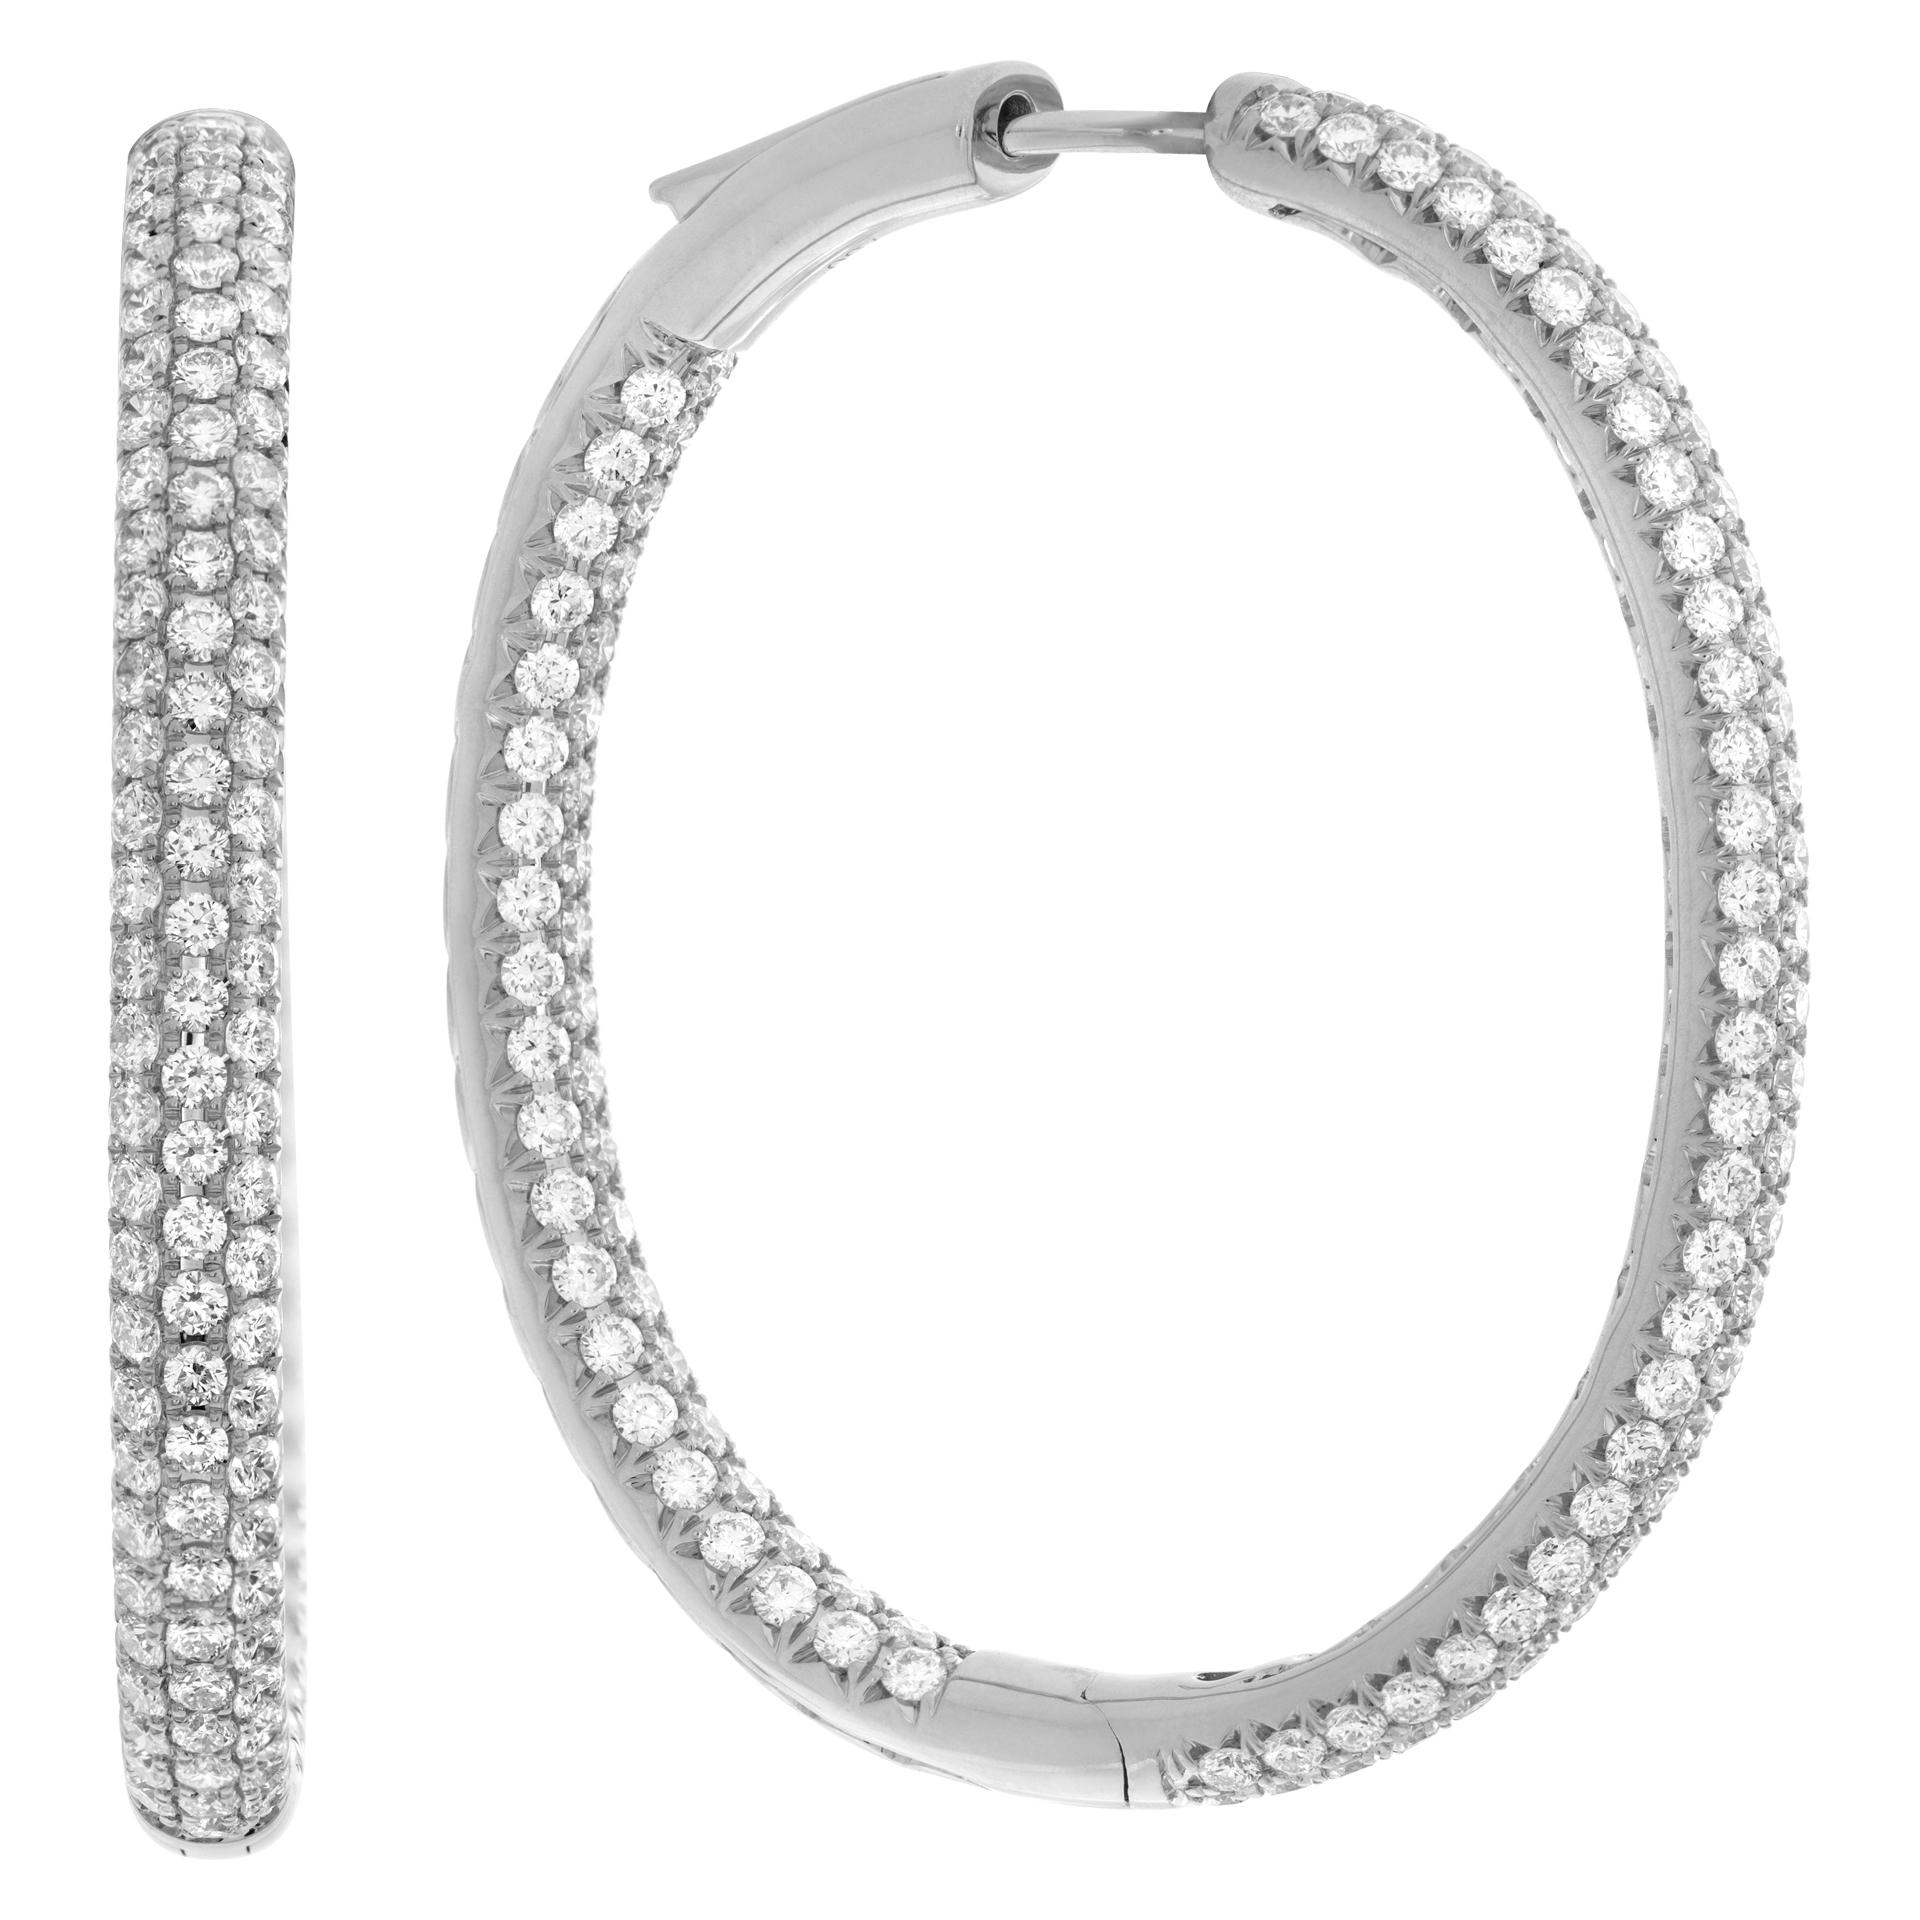 Inside Out Pave Diamond 18k White Gold Hoop Earrings In Excellent Condition For Sale In Surfside, FL